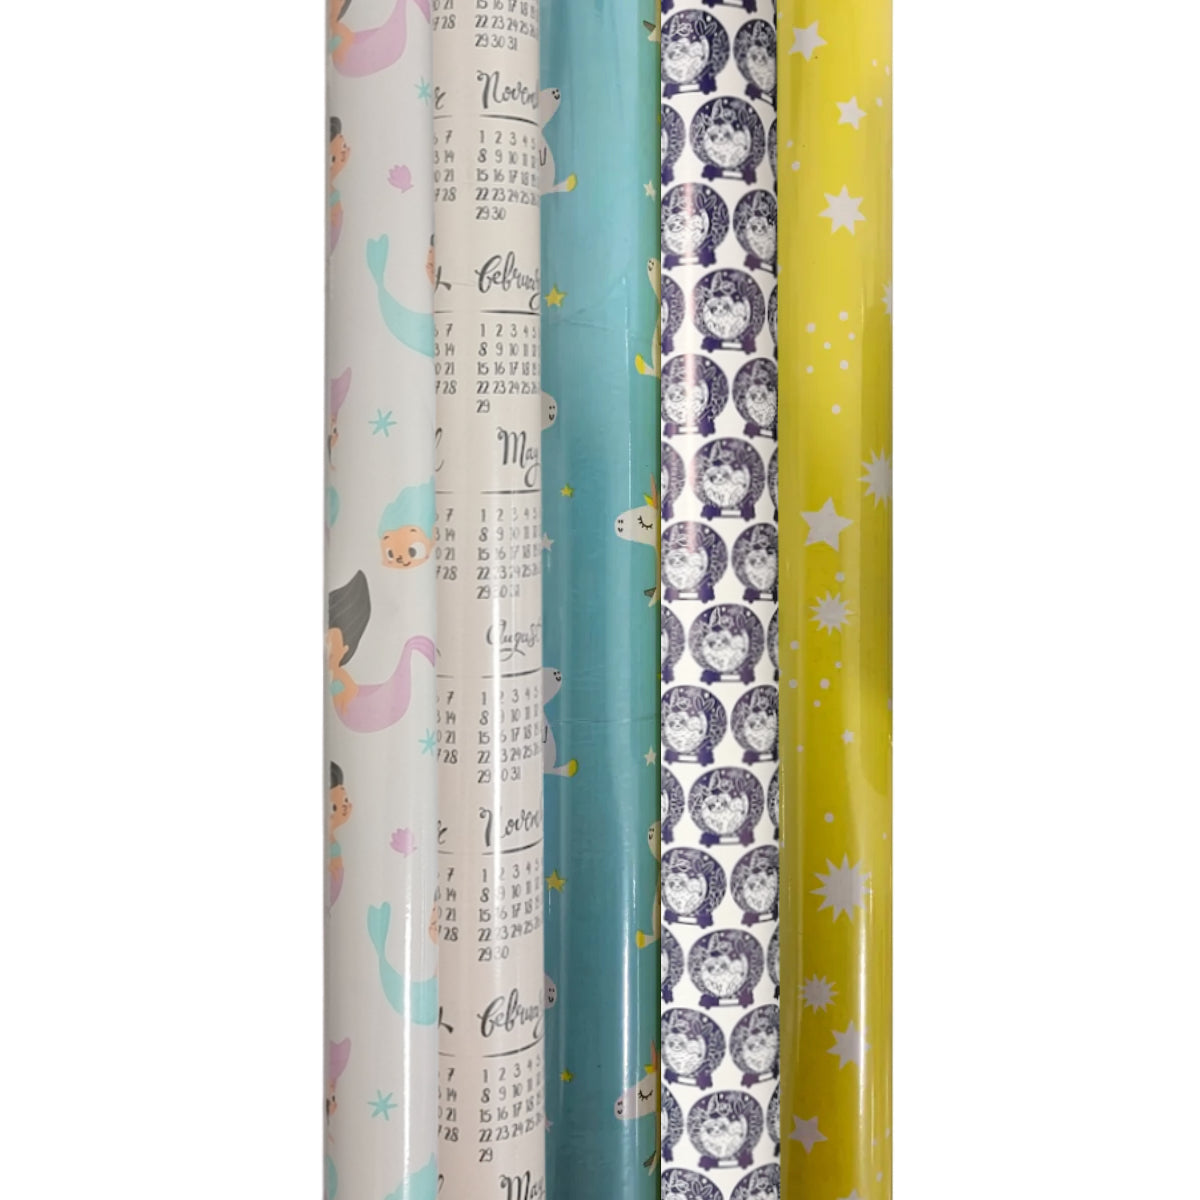 Clairefontaine Gift Wrapping Paper BABY, 70cm  x 2m, Assorted Colors, per Roll